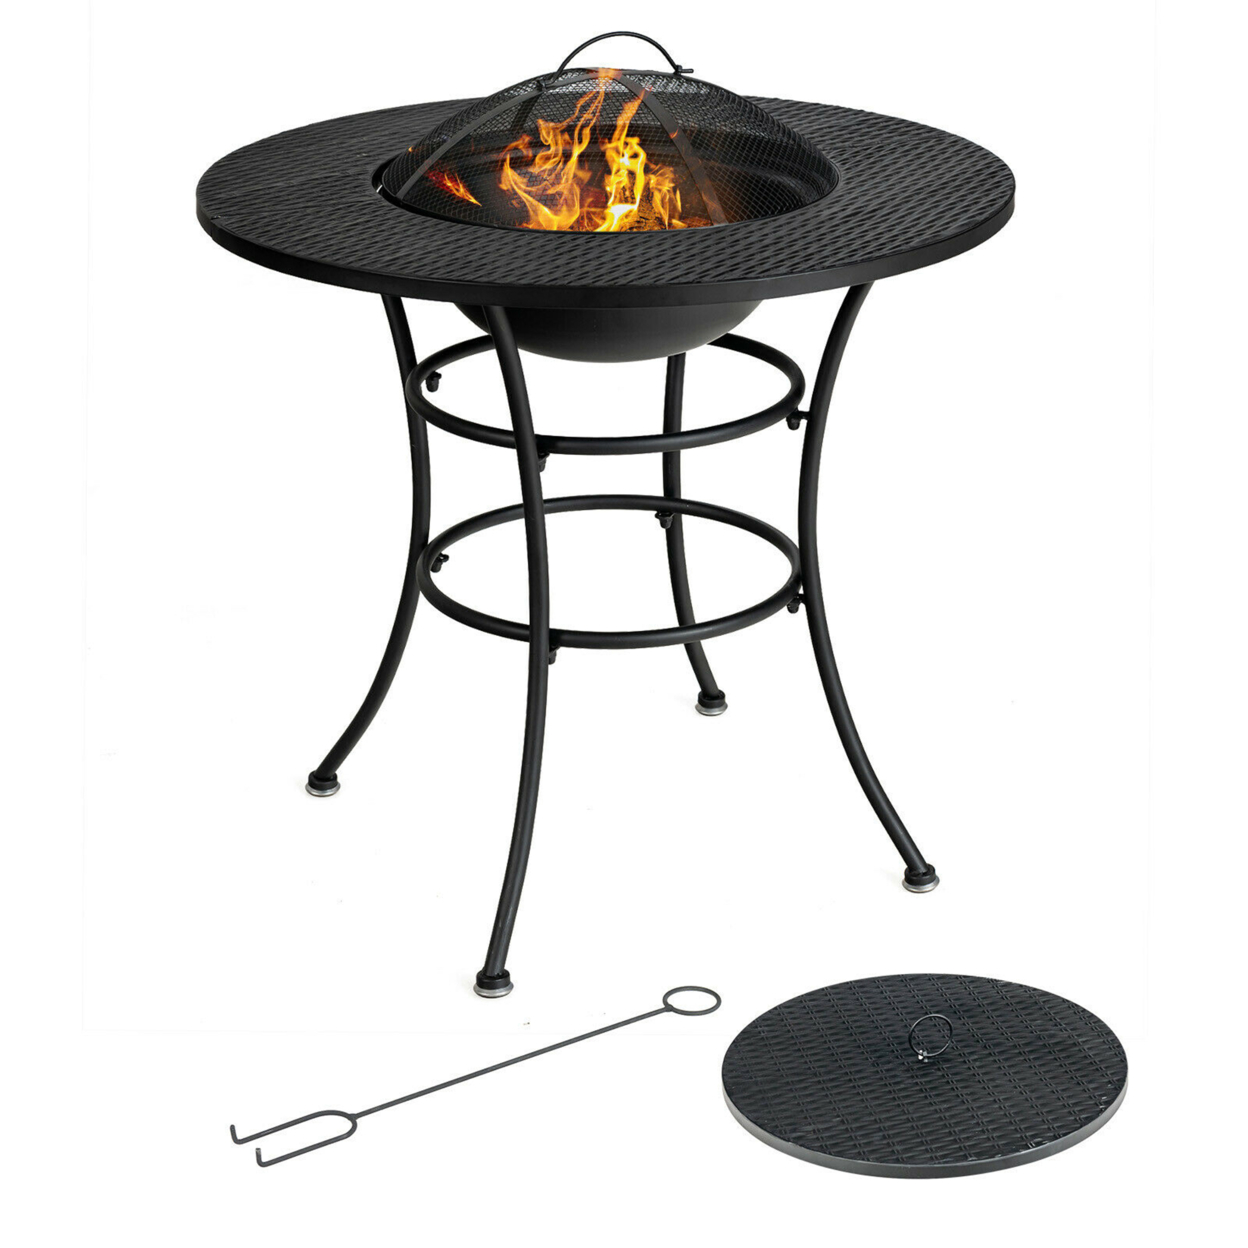 31.5'' Patio Fire Pit Dining Table Charcoal Wood Burning W/ Cooking BBQ Grate